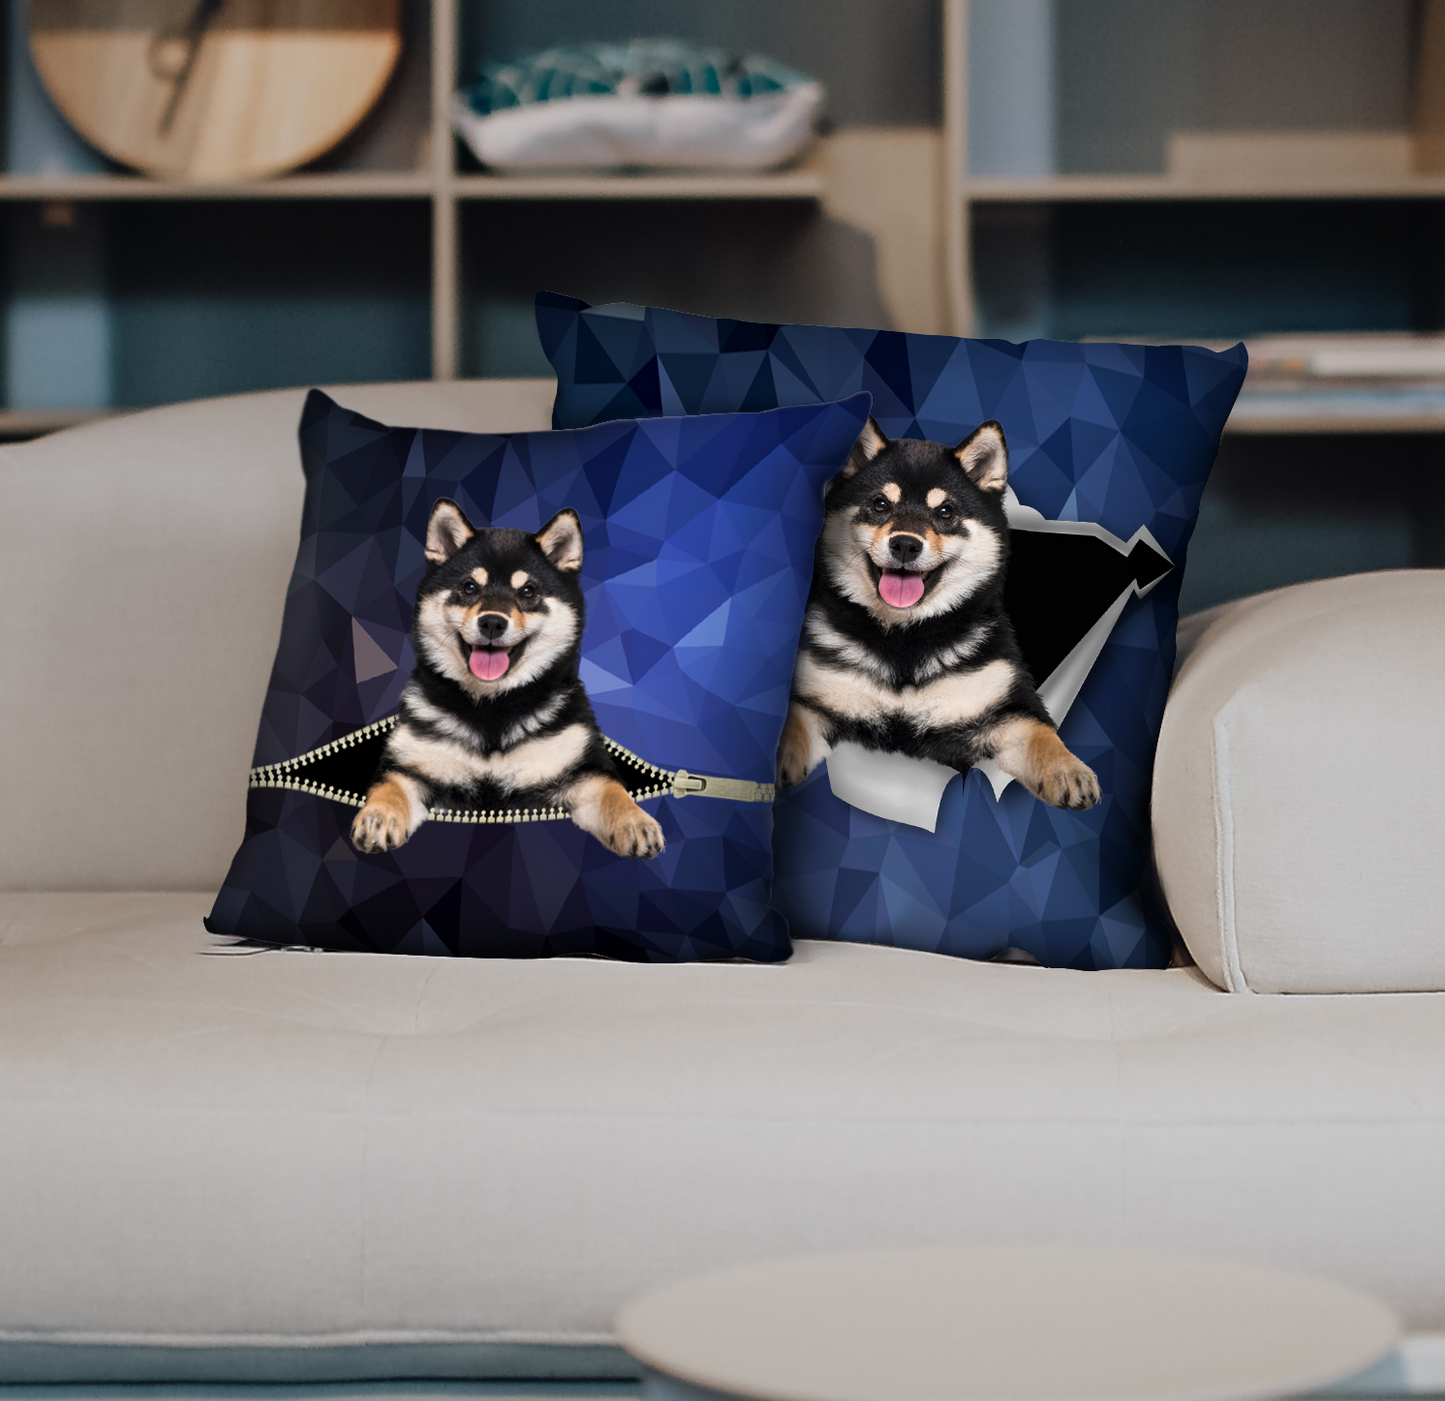 They Steal Your Couch - Shiba Inu Pillow Cases V2 (Set of 2)